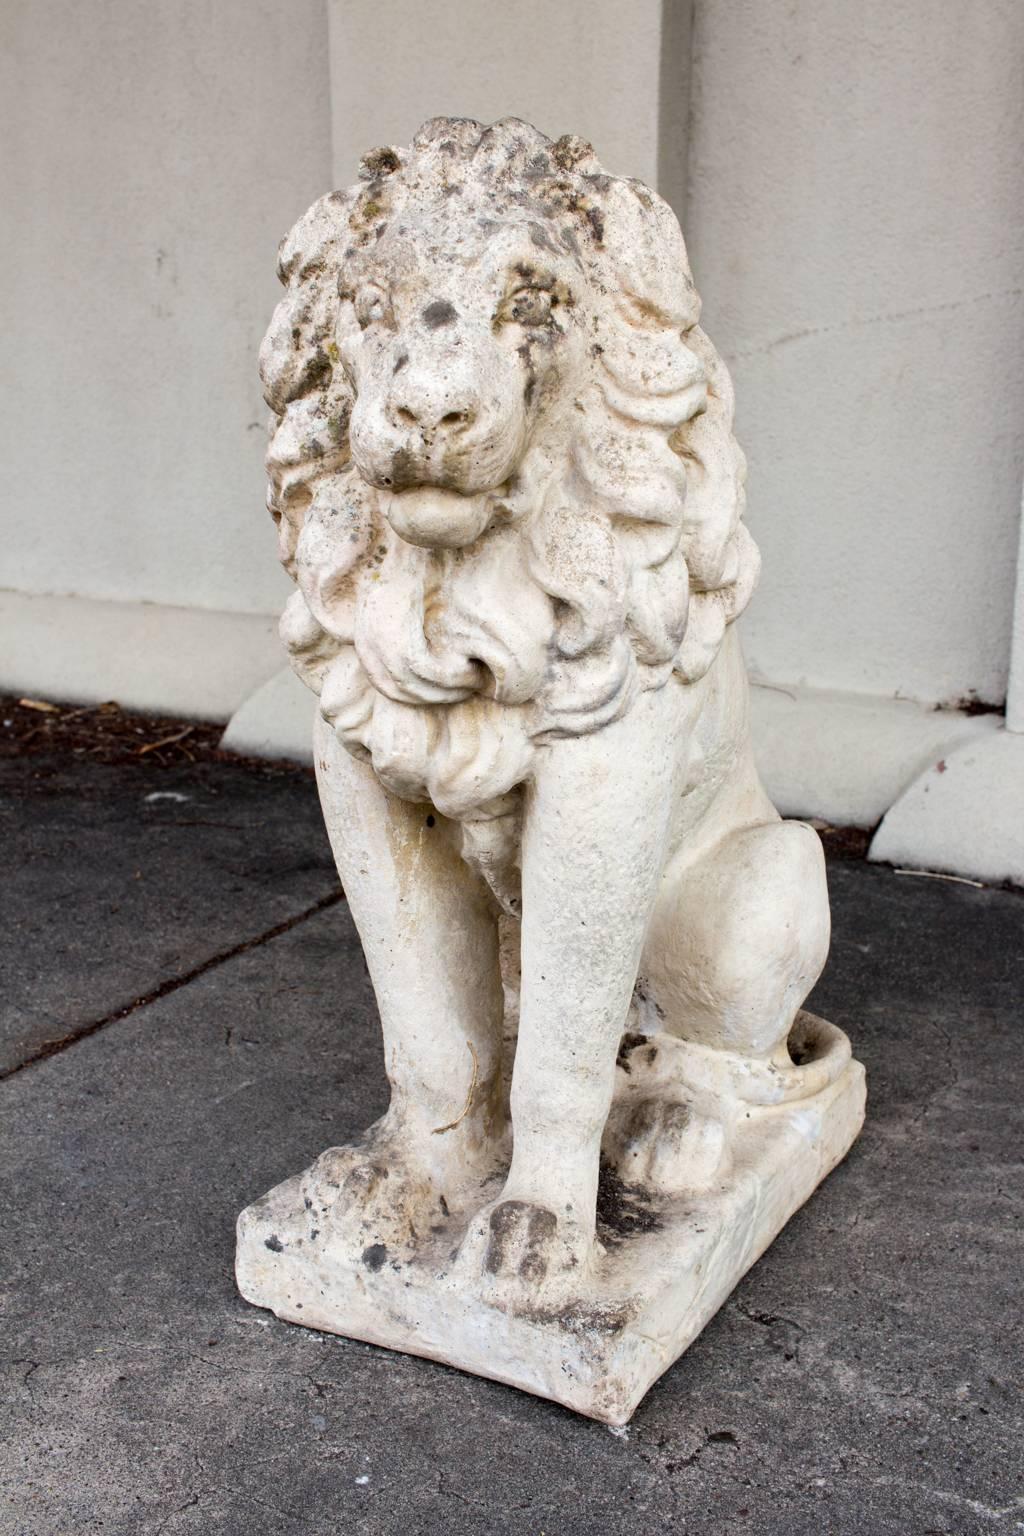 This cast stone lion dates to the 1920s and features a beautiful, weathered, spotted patina. Some chips and cracks are visible here and there, but overall he is in good condition, considering the time spent outdoors. Perfect for your front door